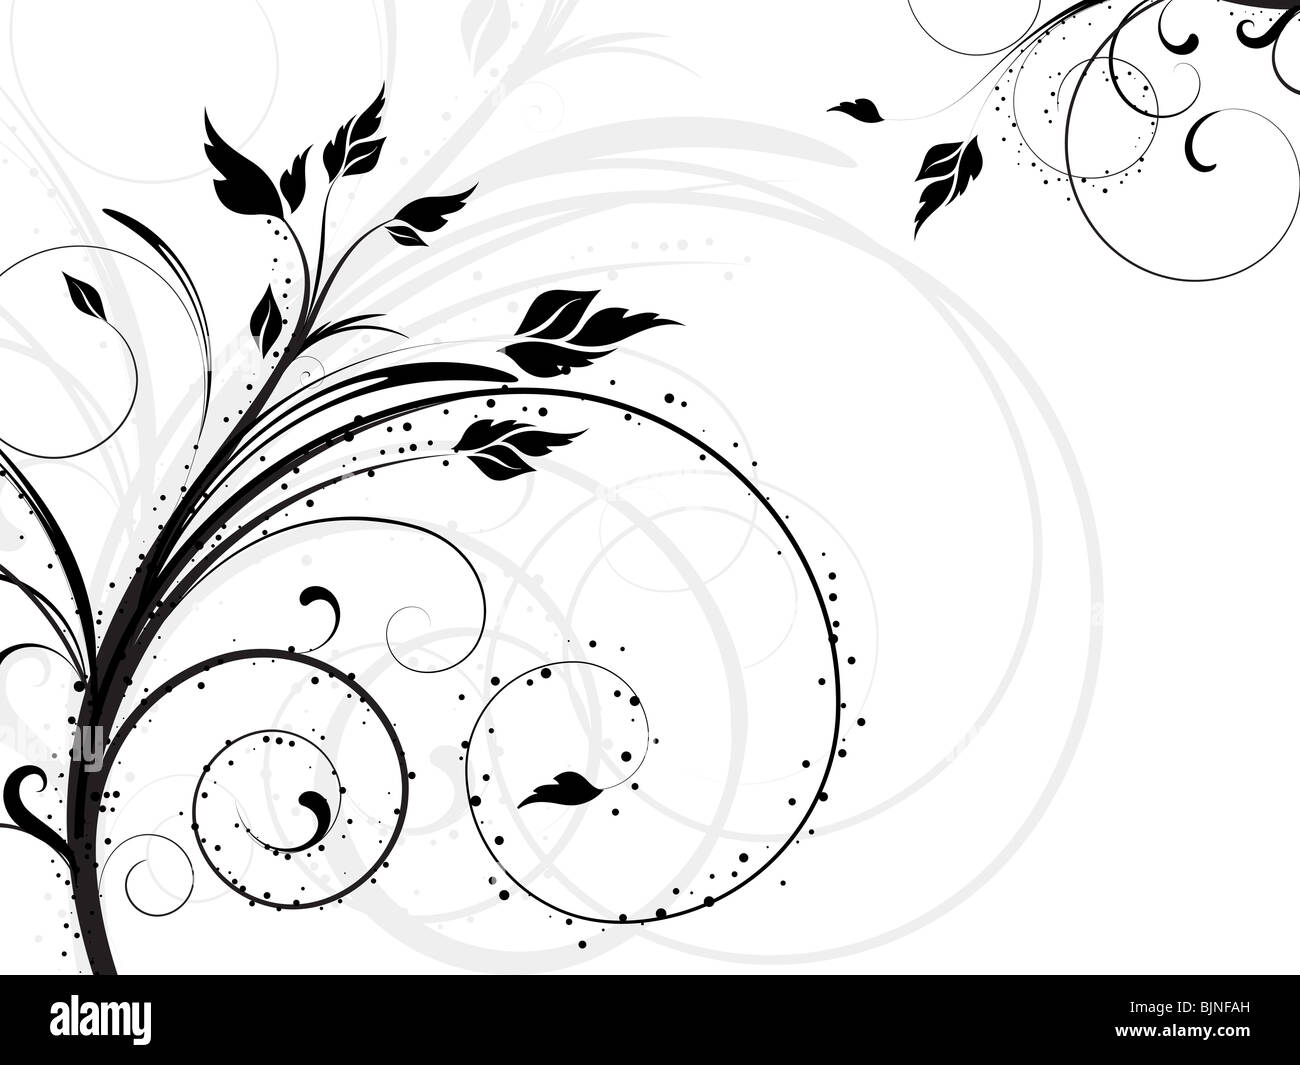 Decorative ABSTRACT floral design Stock Photo